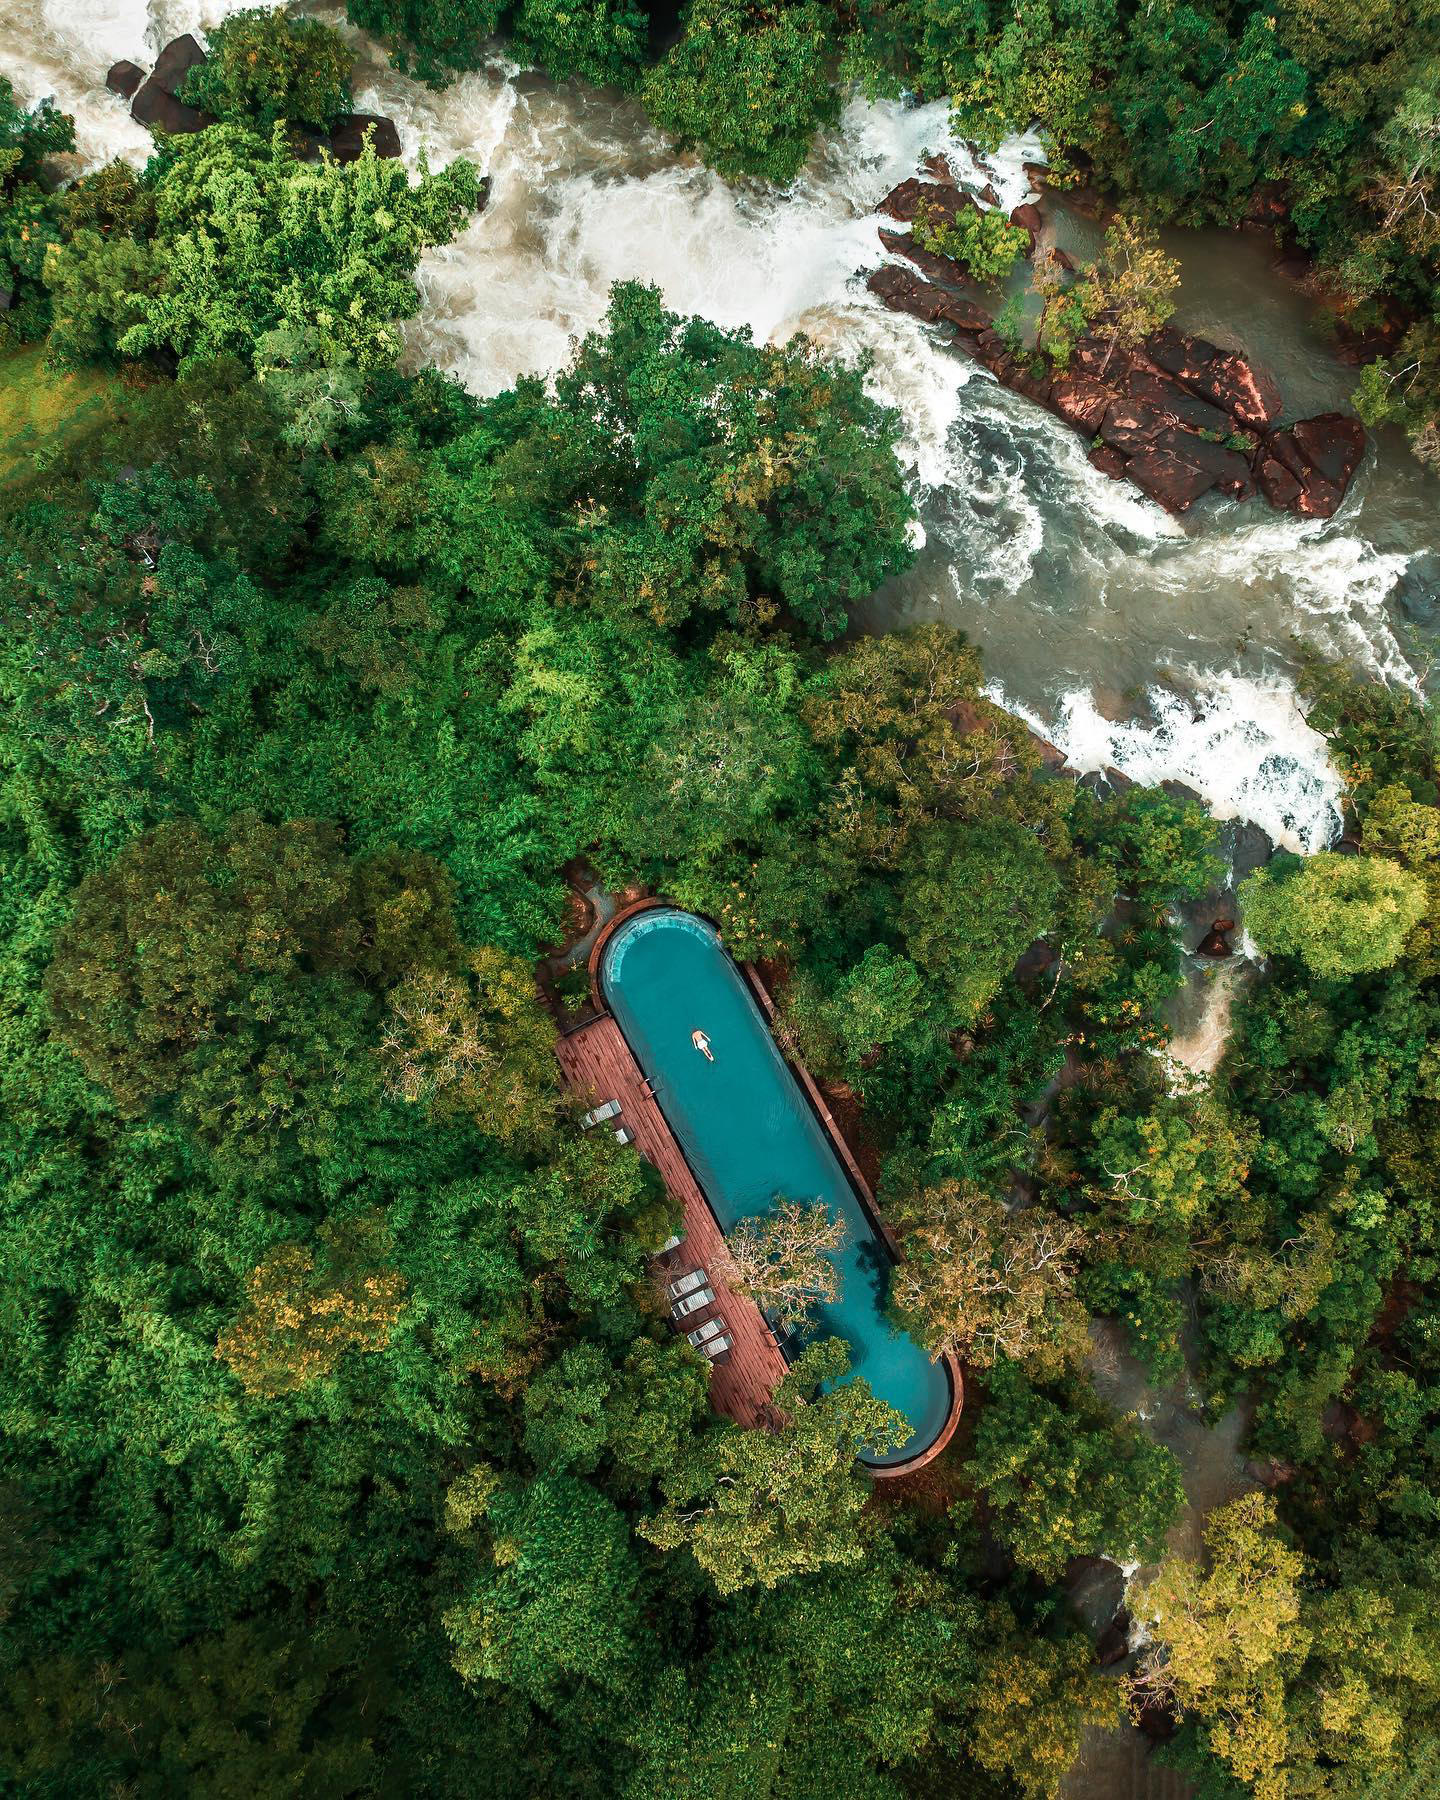 image  1 JEREMY AUSTIN - Surrounded by the Cambodian jungle and perched on the edge of a raging waterfall #sh